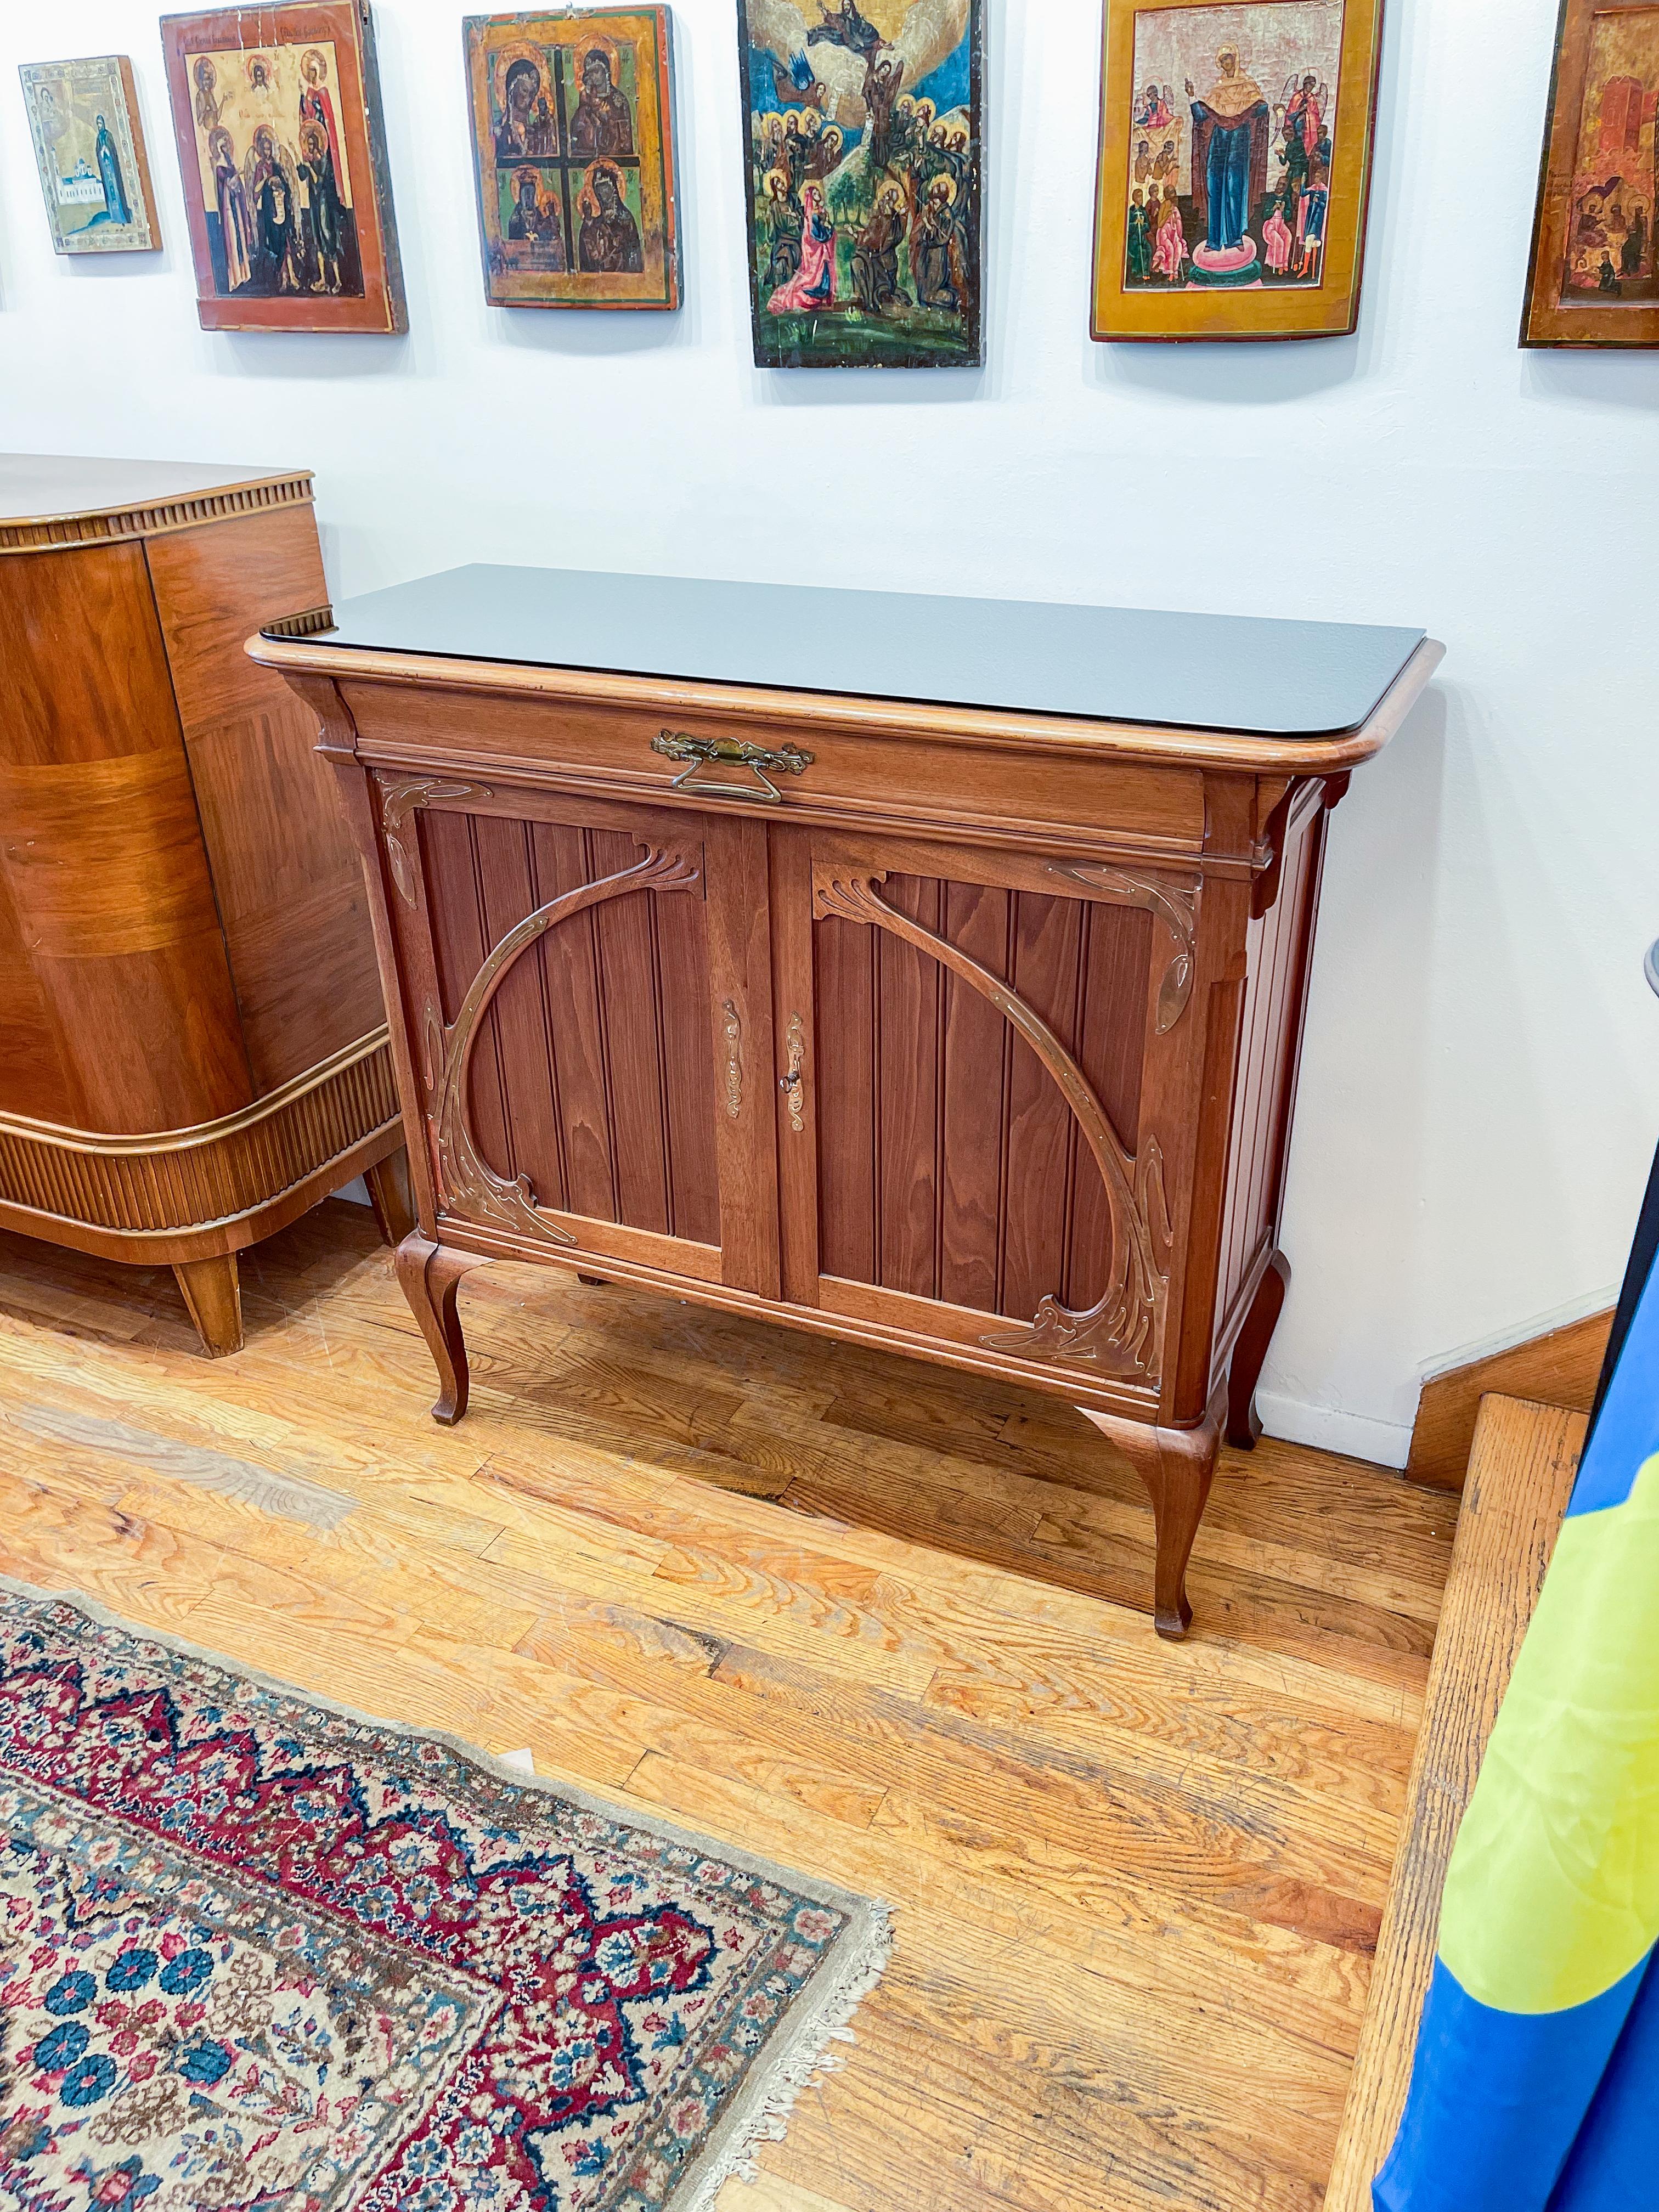 A beautiful and fully solid sideboard. Brass Hardware and appliques complement the swooping art nouveau case. The case is constructed of solid frames inset with floating mahogany boards.  

The frame of the case is solid, and curves according to the